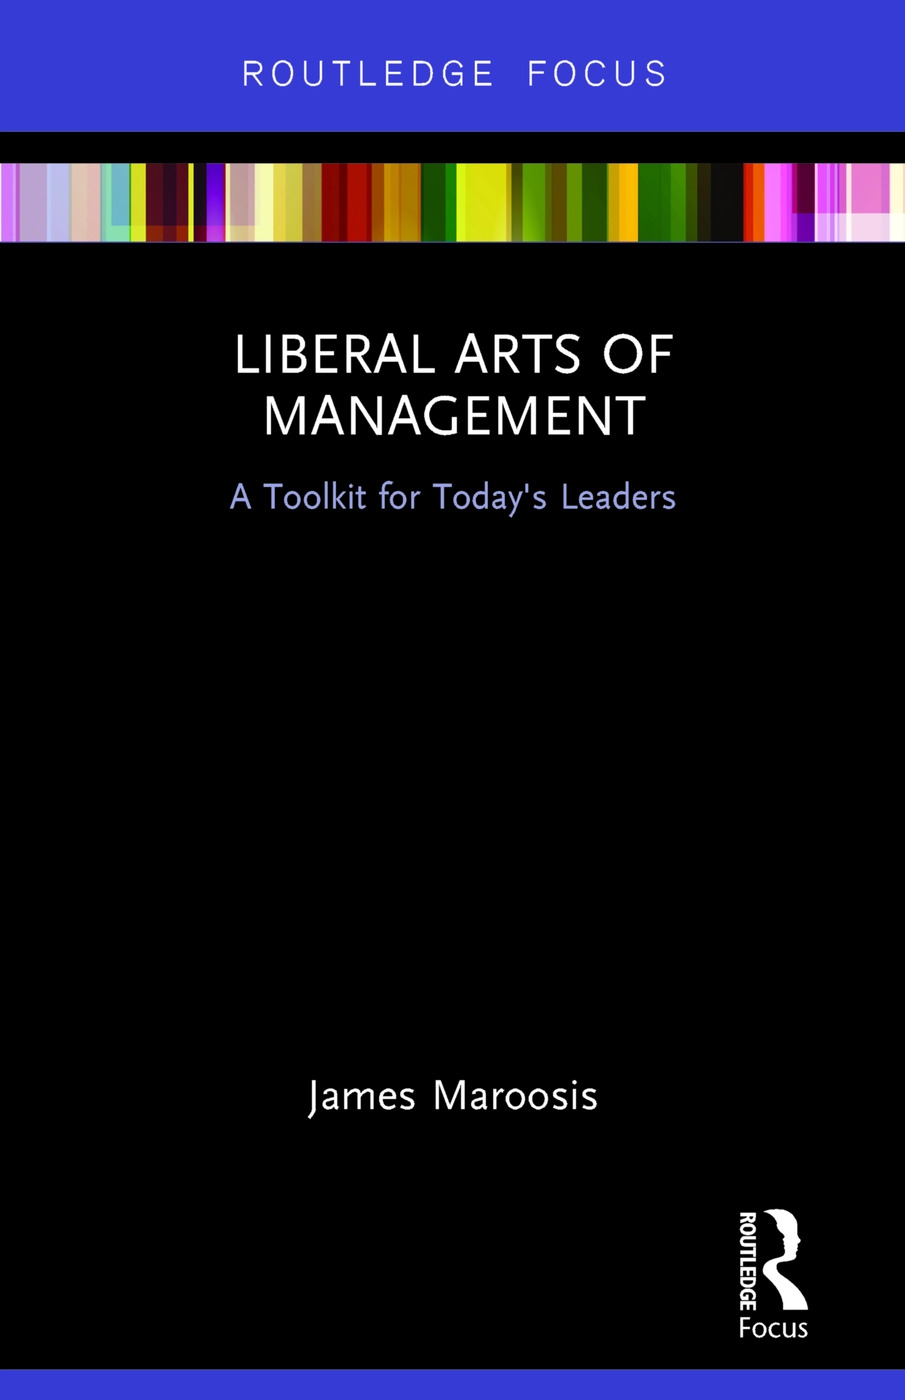 Liberal Arts of Management: A Toolkit for Today’s Leaders